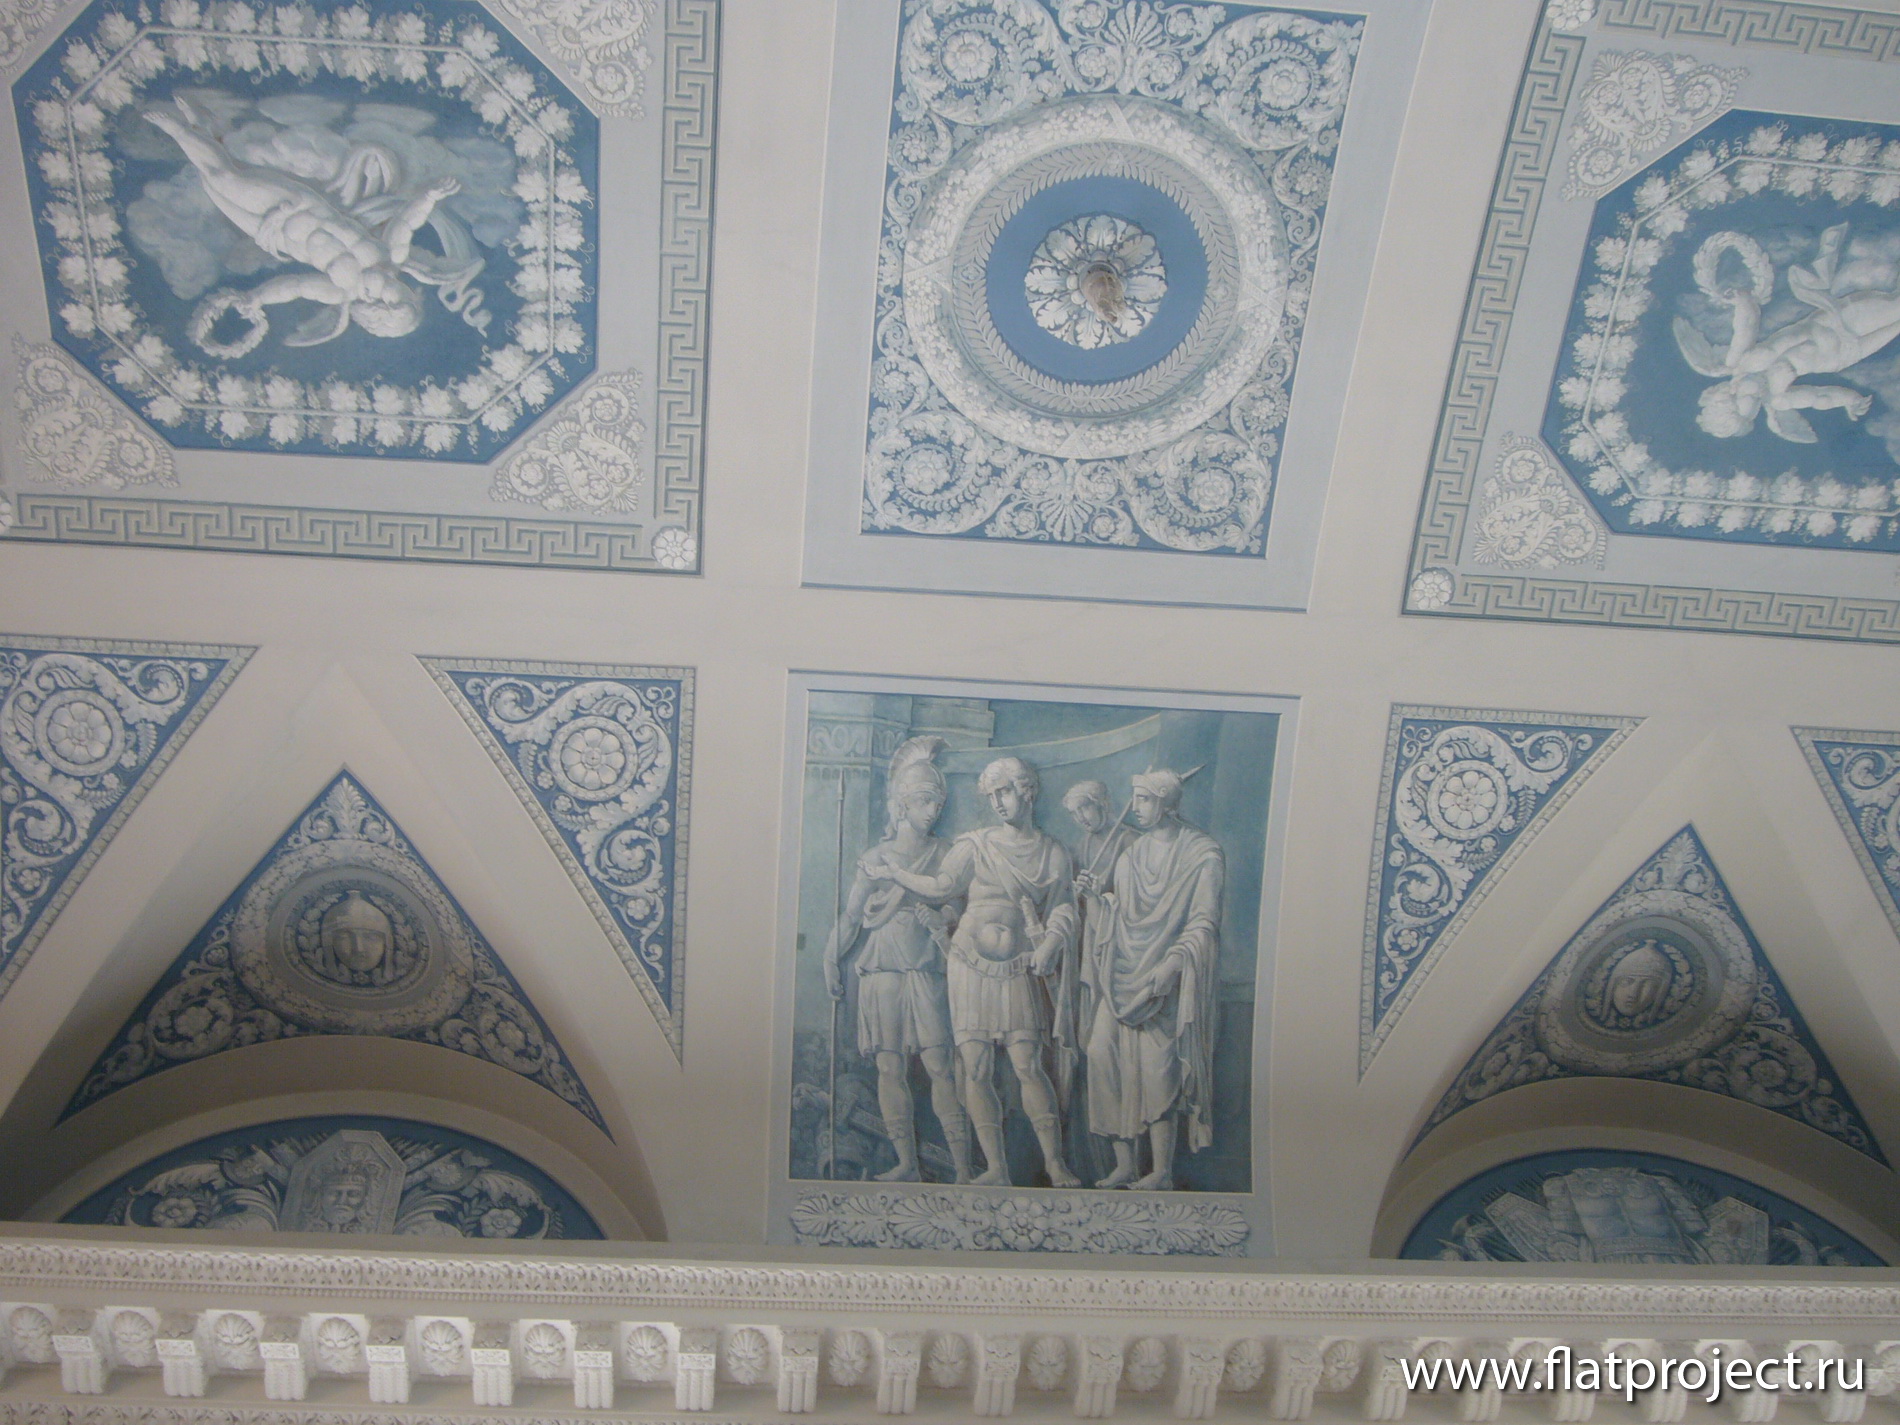 The State Russian museum interiors – photo 16